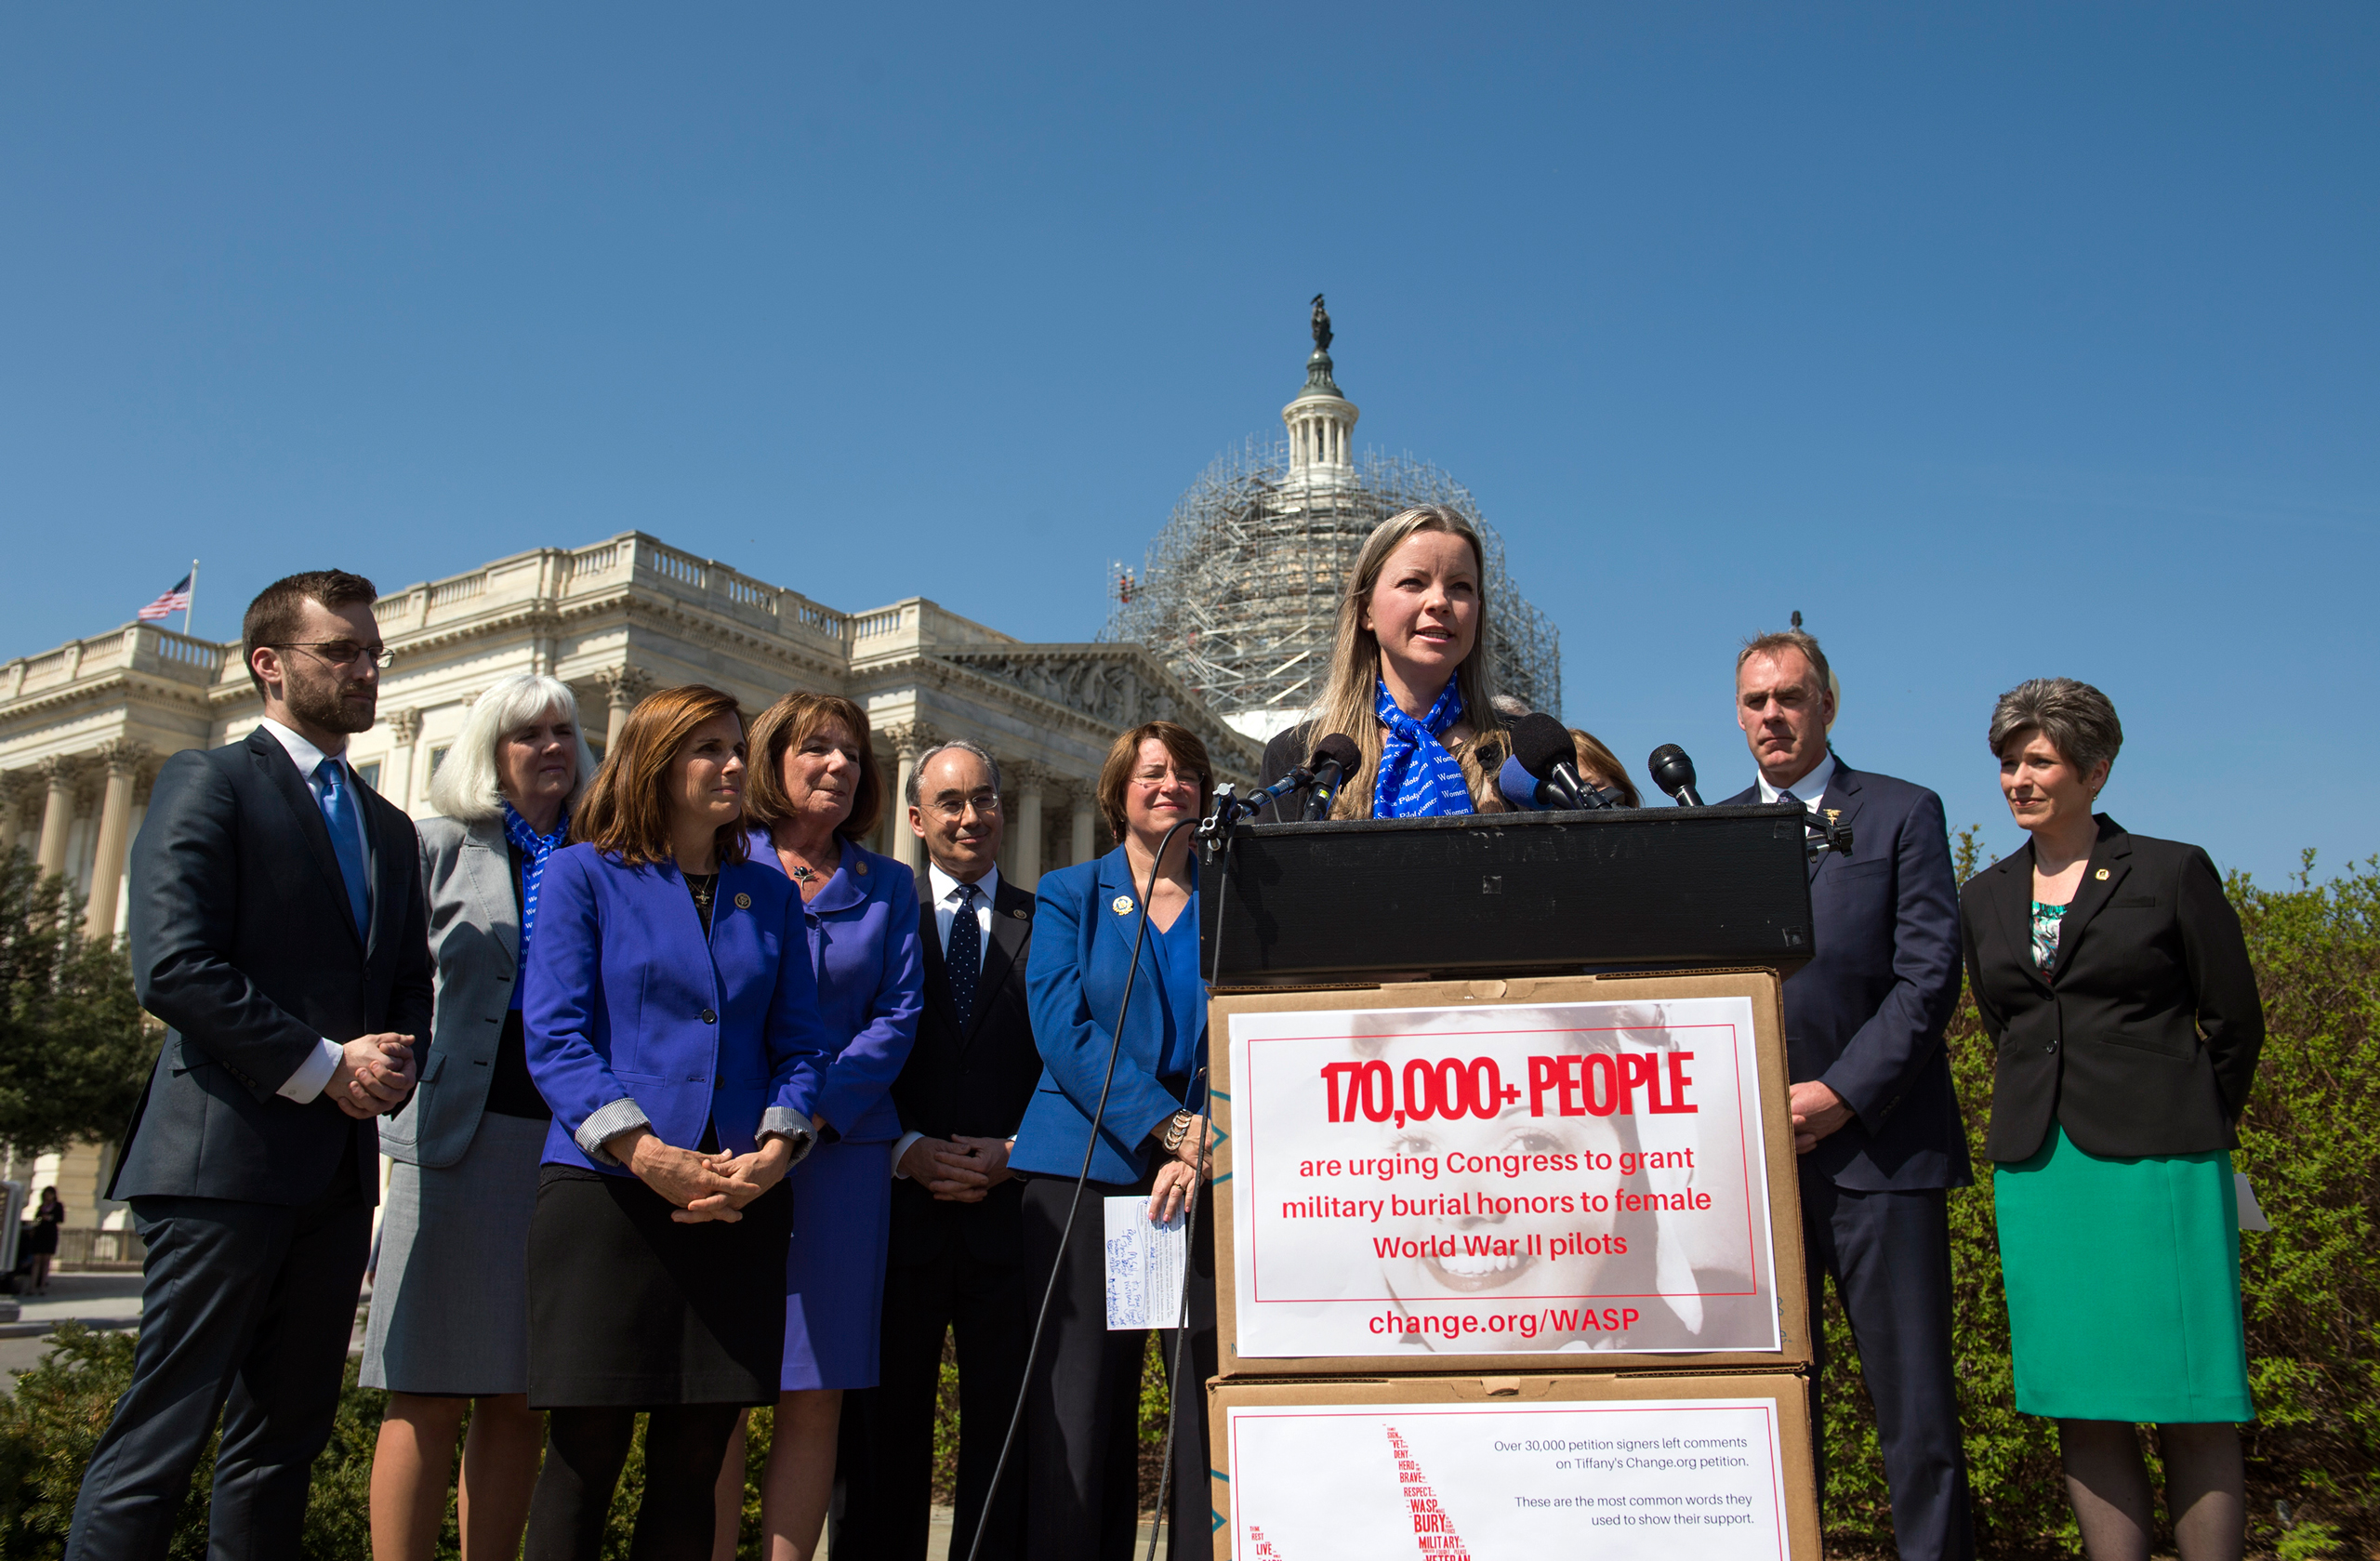 Erin Miller, granddaughter of WWII veteran WASP (Women Airforce Service Pilots) Elaine Harmon, speaks on the reinstatement of WWII female pilots at Arlington National Cemetery on Capitol Hill in Washington on March 16, 2016. (Molly Riley—AP)